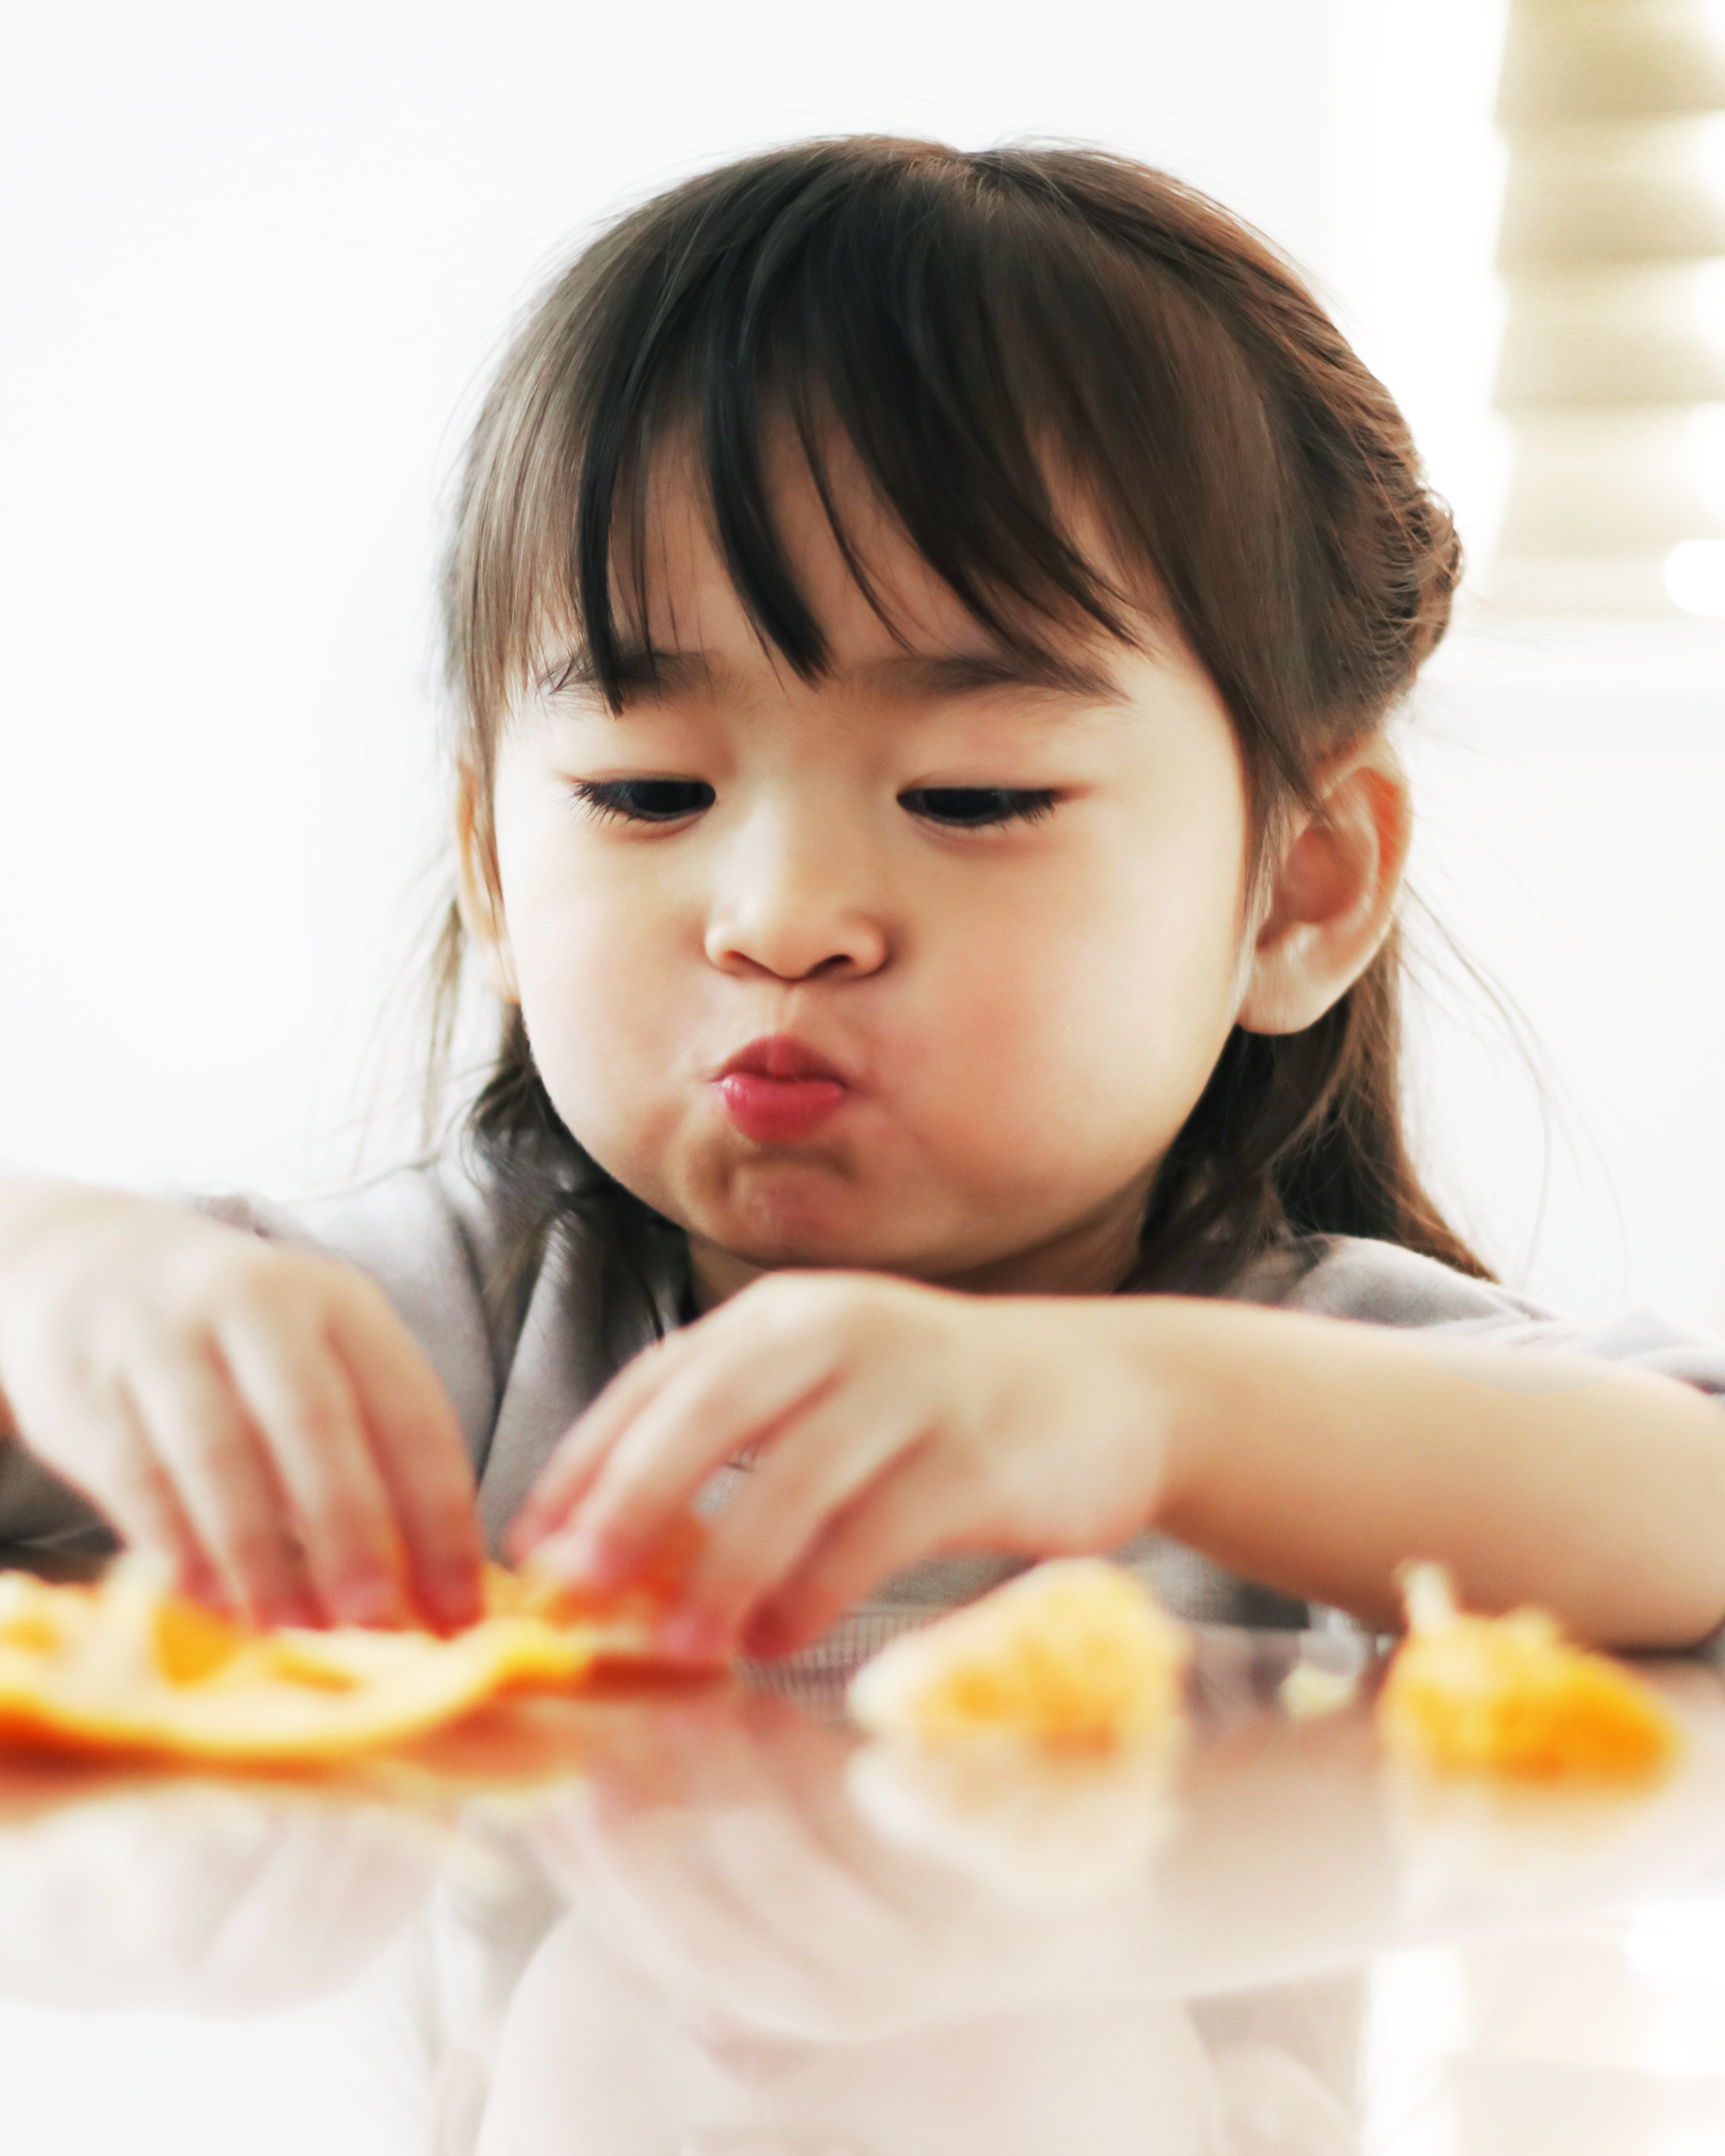 Young girl is sitting at a table, peeling and eating a clementine